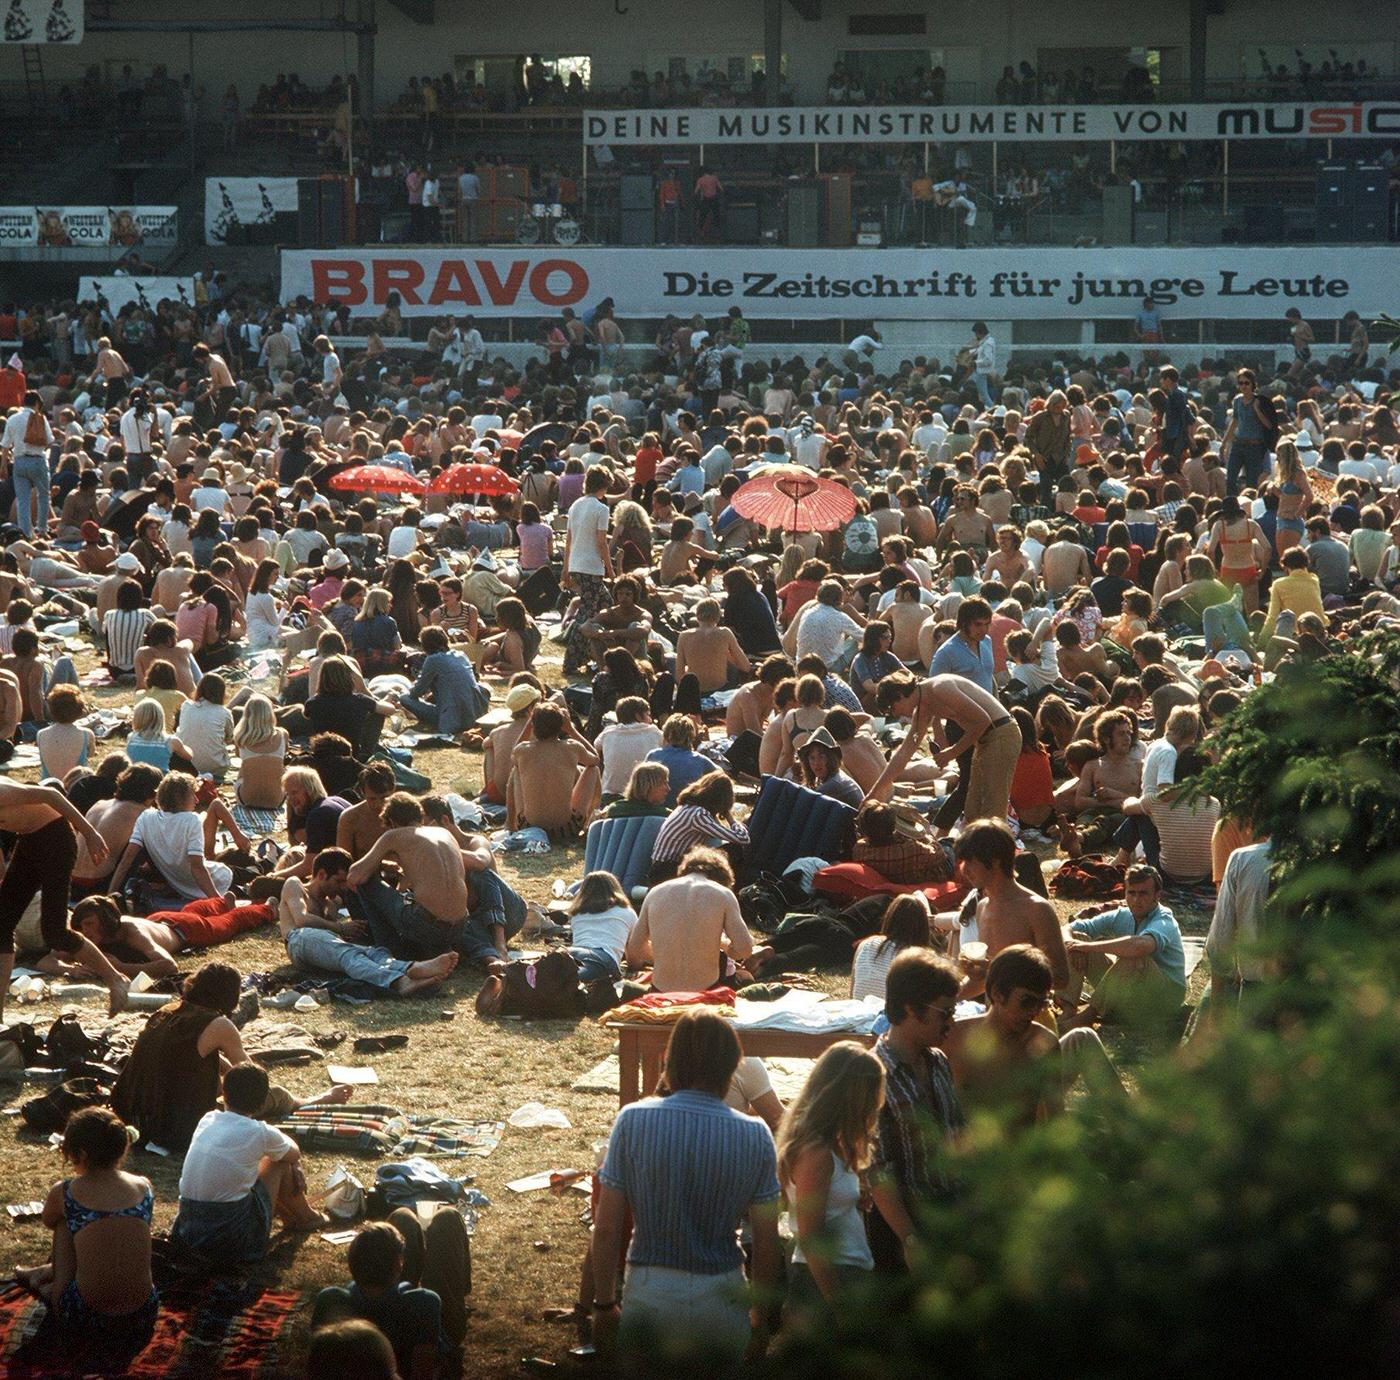 Visitors at the first Hamburg Open-Air Festival "big gig" on June 20, 1970 at the Flottbeker Reiterverein grounds in Hamburg, Germany.